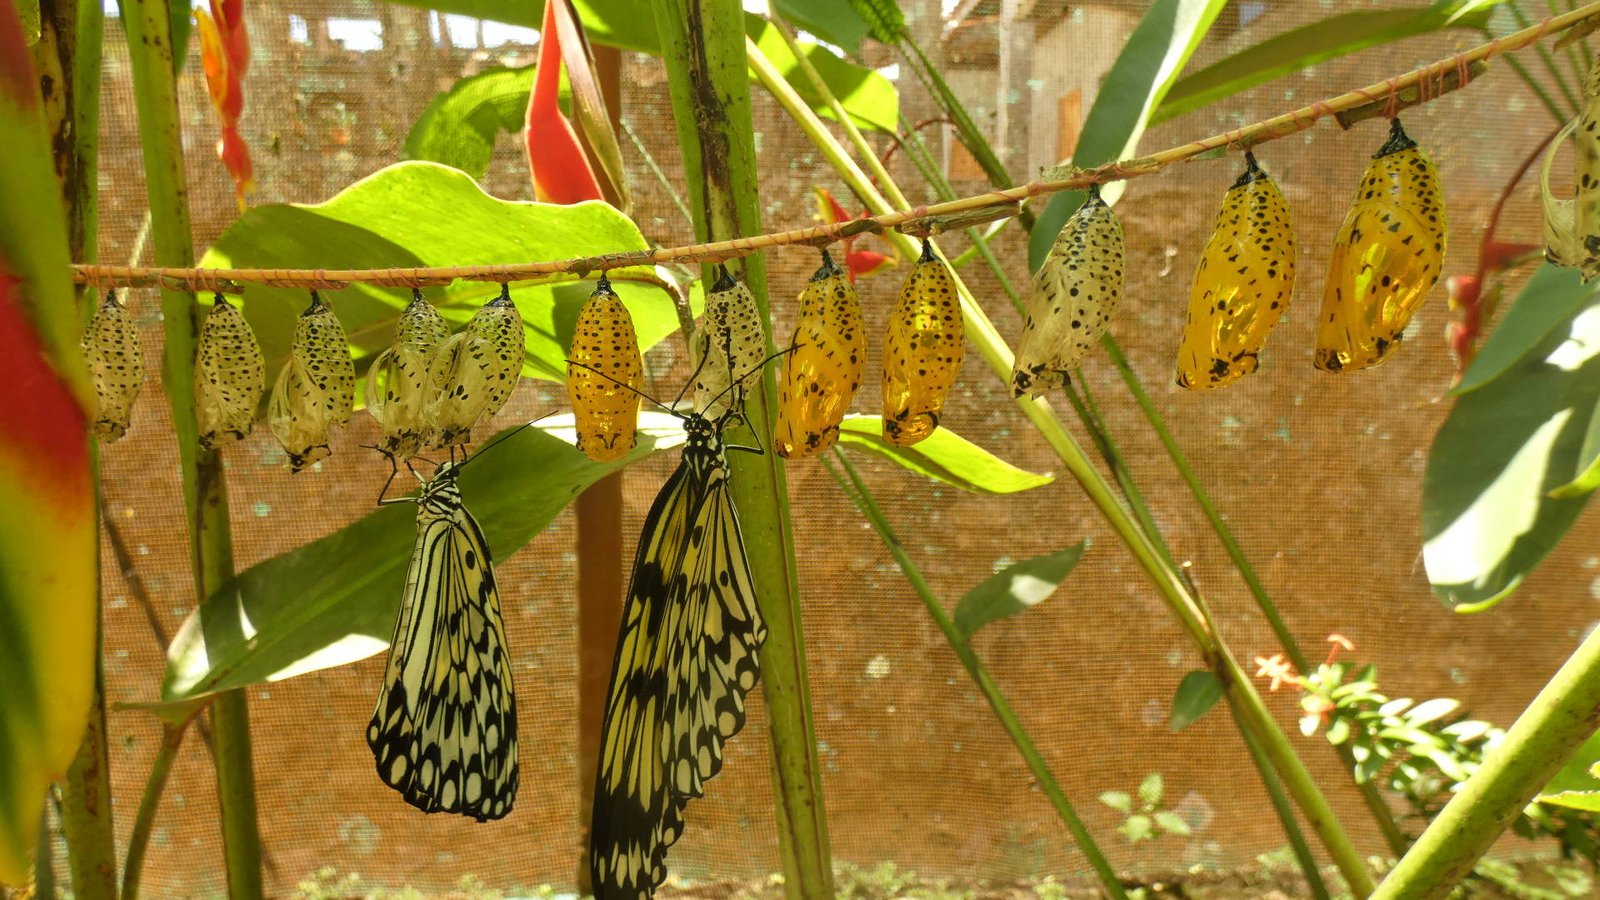 We review Siquijor butterfly sanctuary in Lazi Siquijor